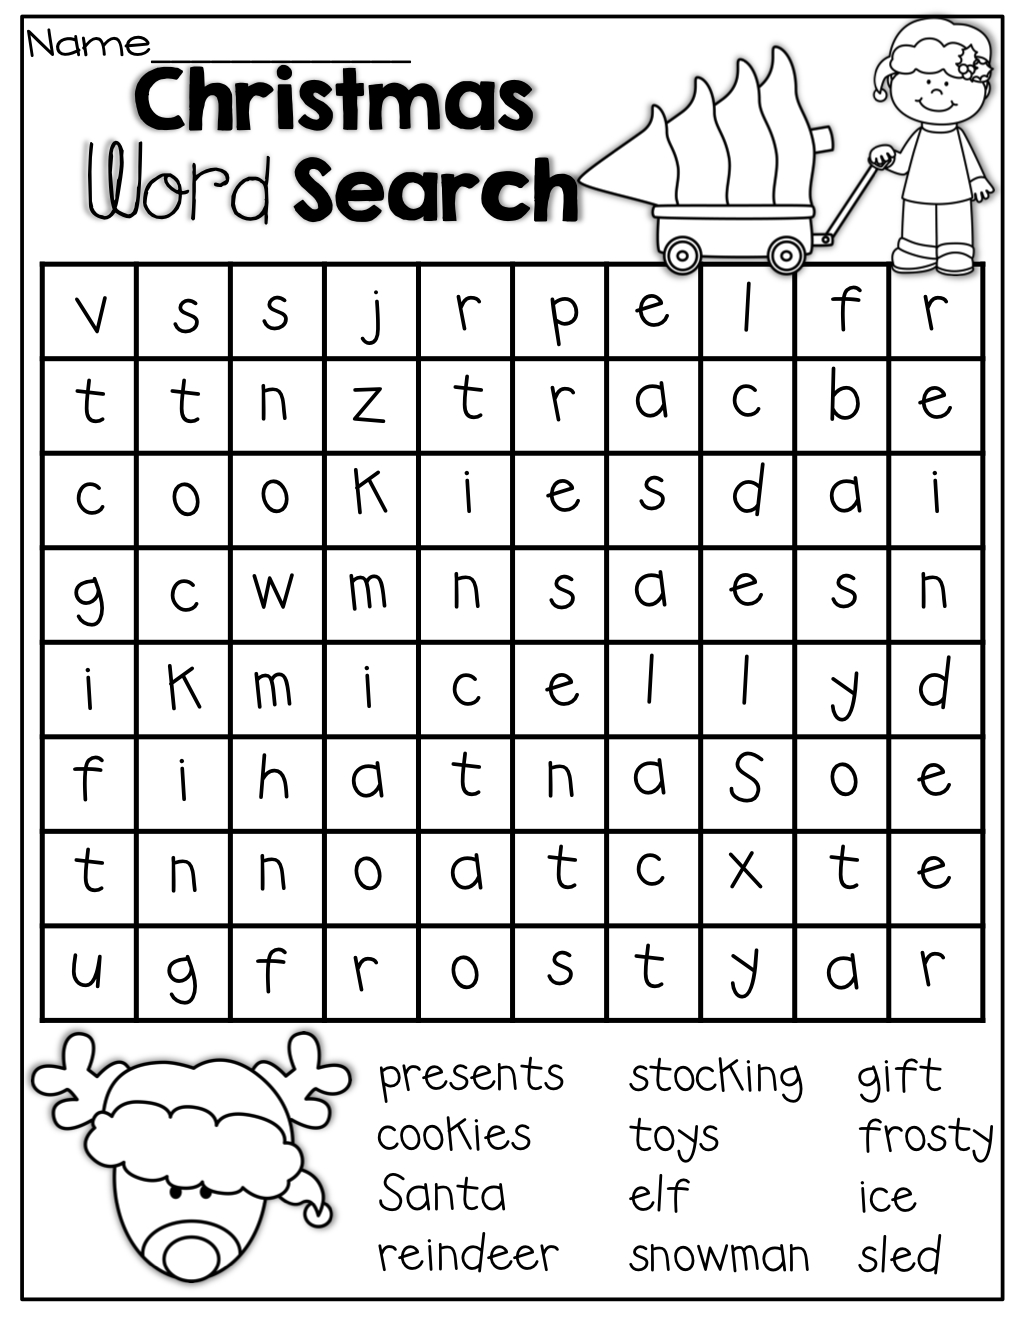 December No Prep Packet (1St Grade) | School-Holidays-Christmas - 2Nd Grade Word Search Free Printable